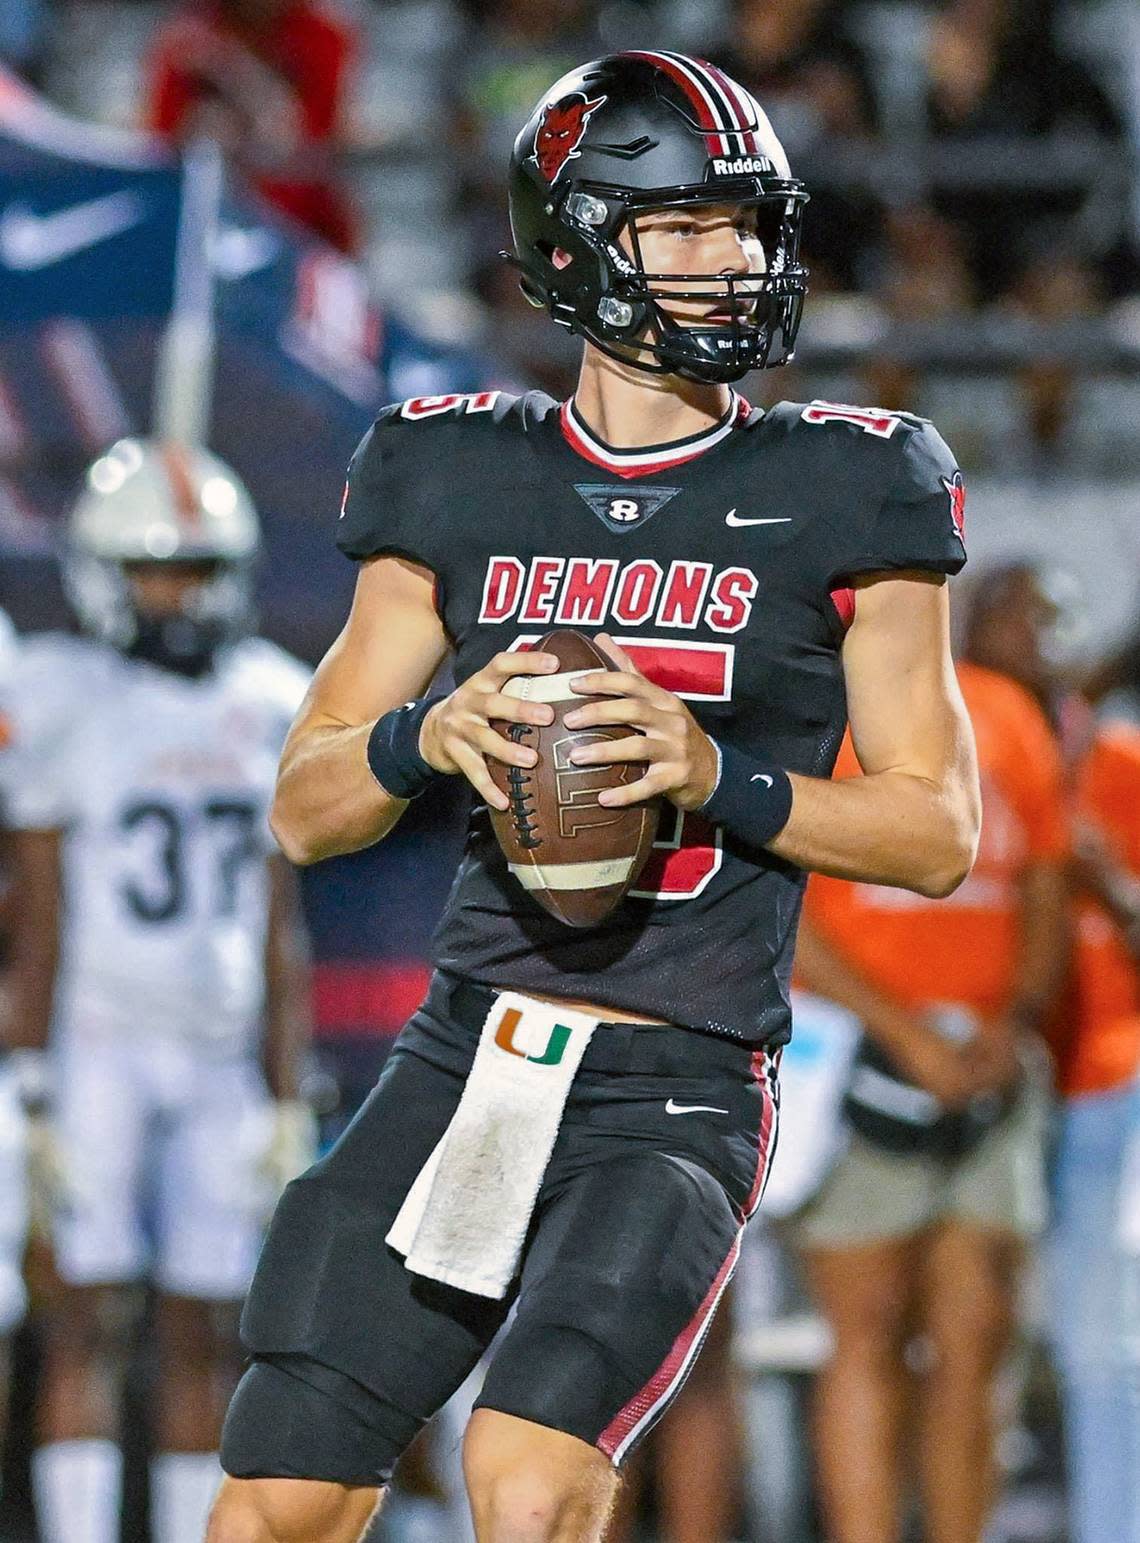 UM quarterback commit Judd Anderson is shown in action during a 2023 game for Warner Robins (Georgia) High. Greg Giedd Photography.